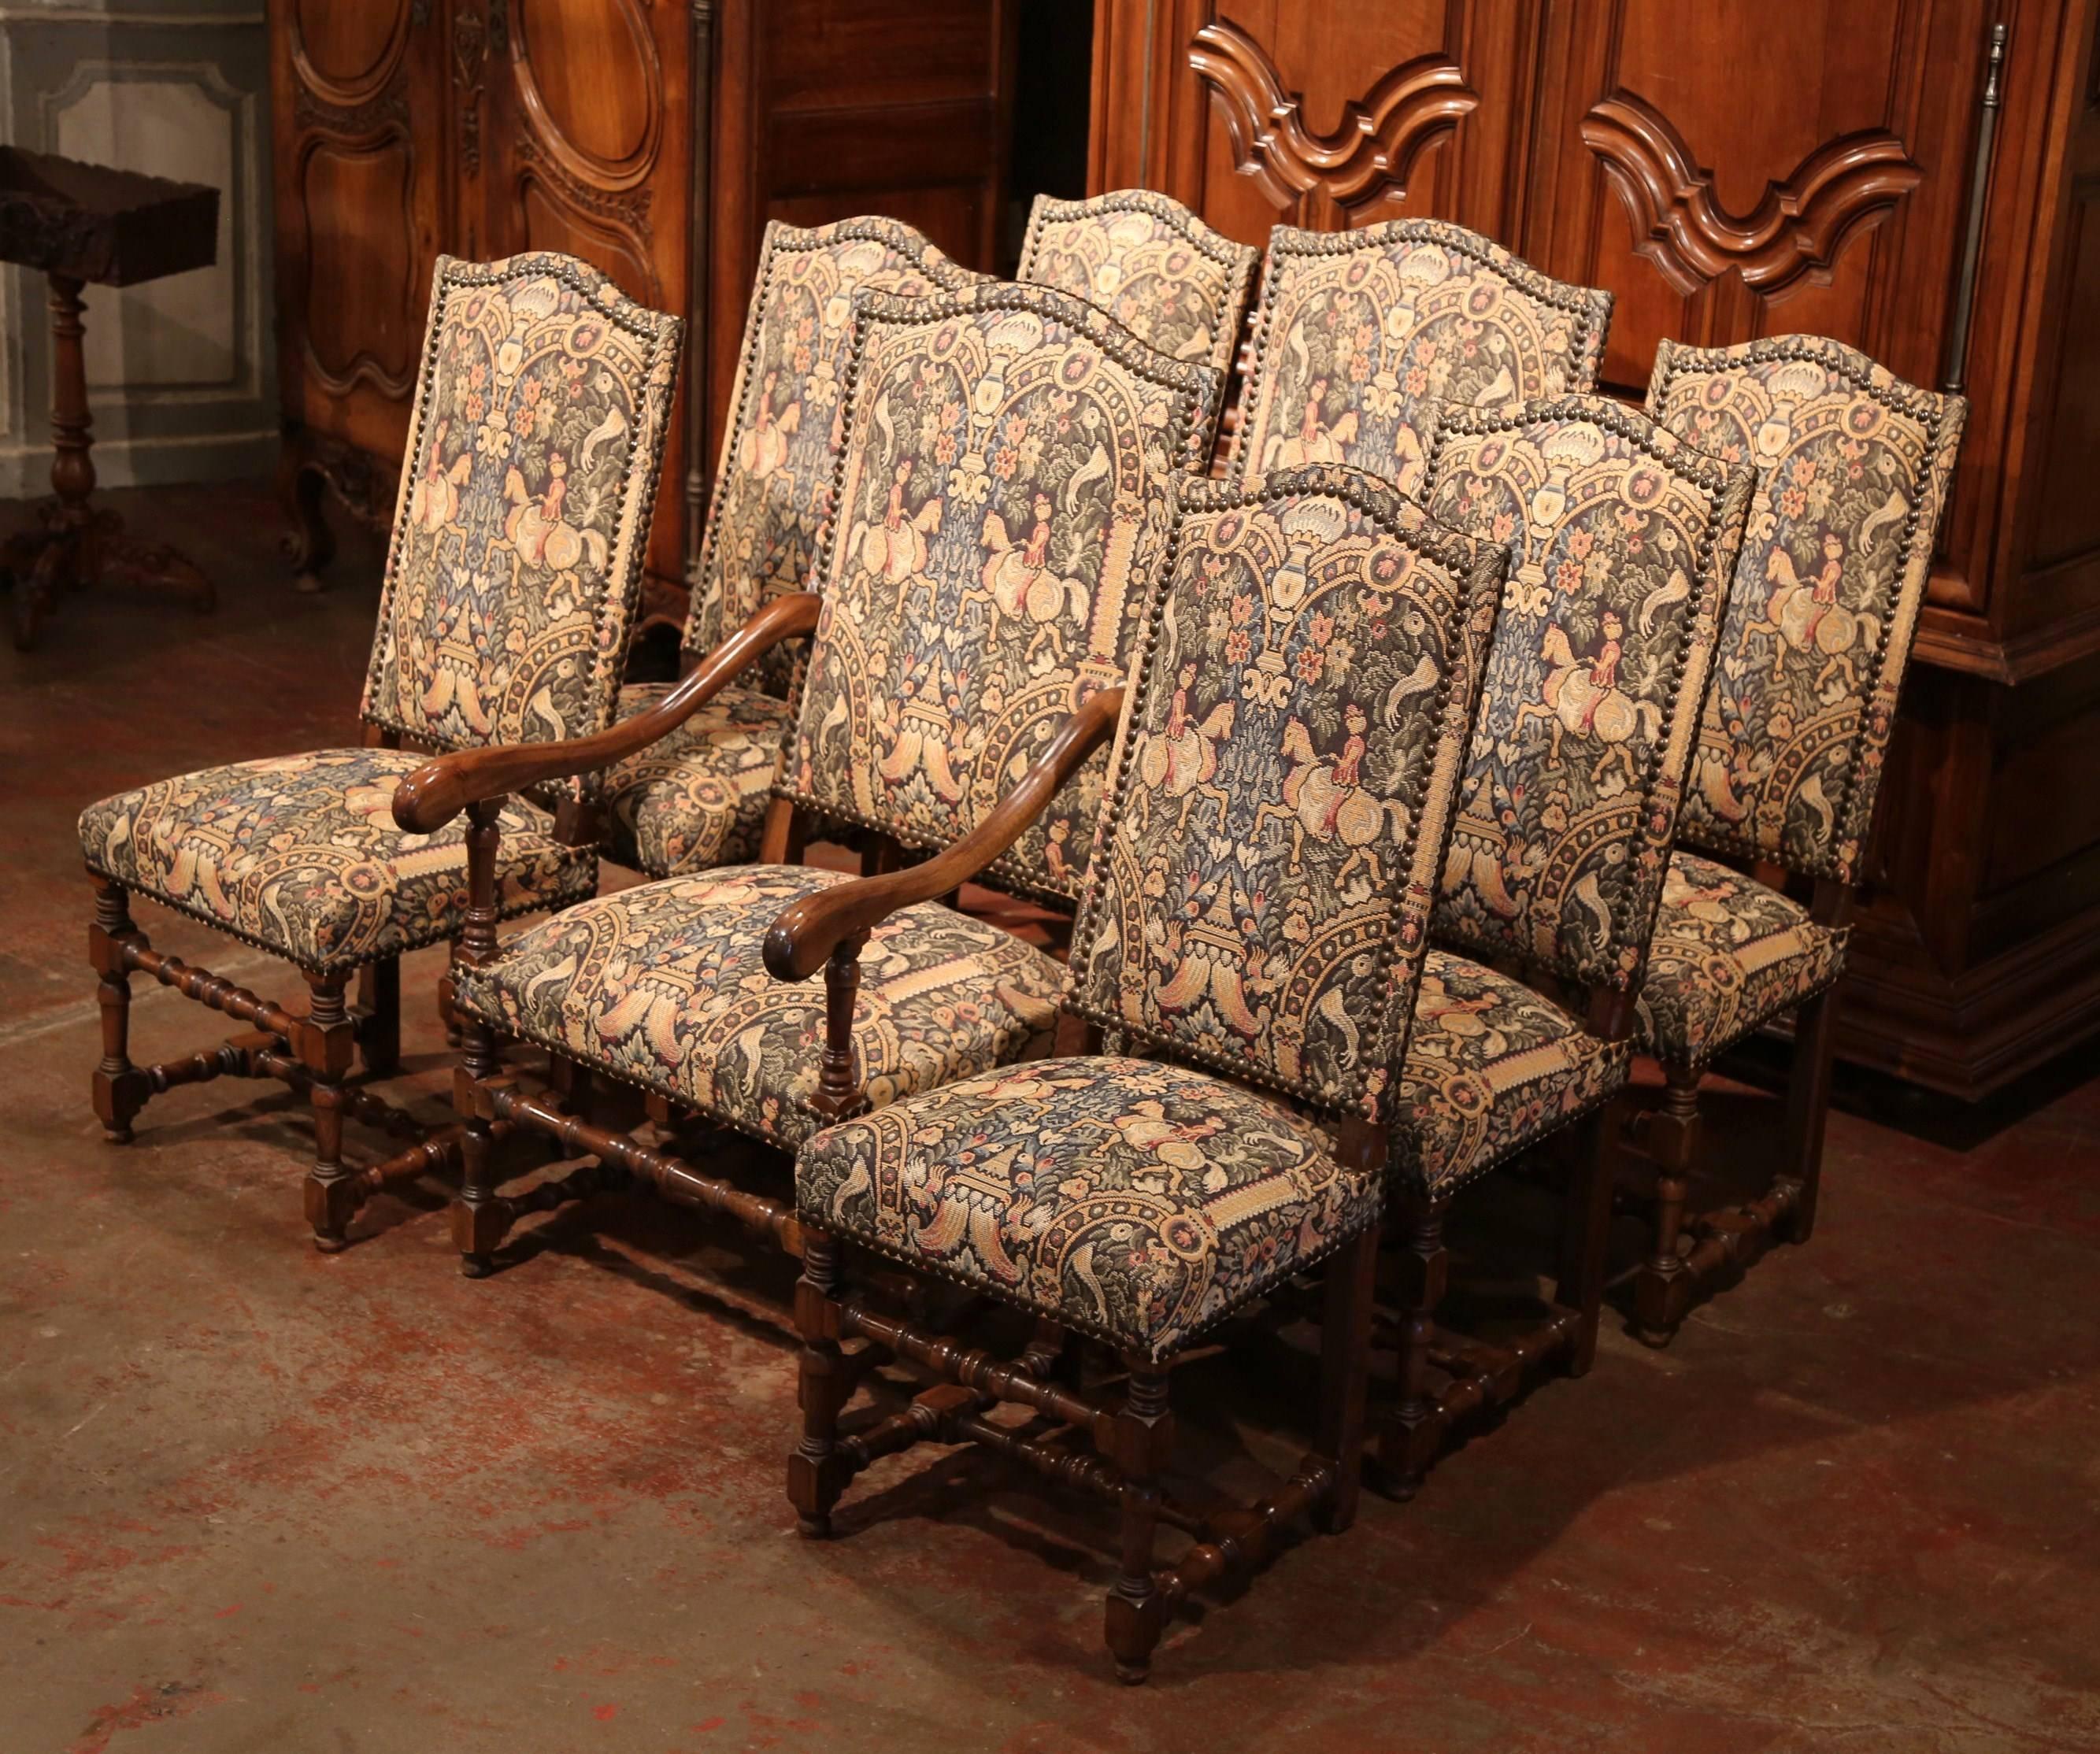 This fine set of dining room chairs and armchairs was crafted in France, circa 1980. All eight chairs in the set feature nicely turned legs with stretchers, a high back and wide seat for comfort. Each piece is upholstered on the back and seat